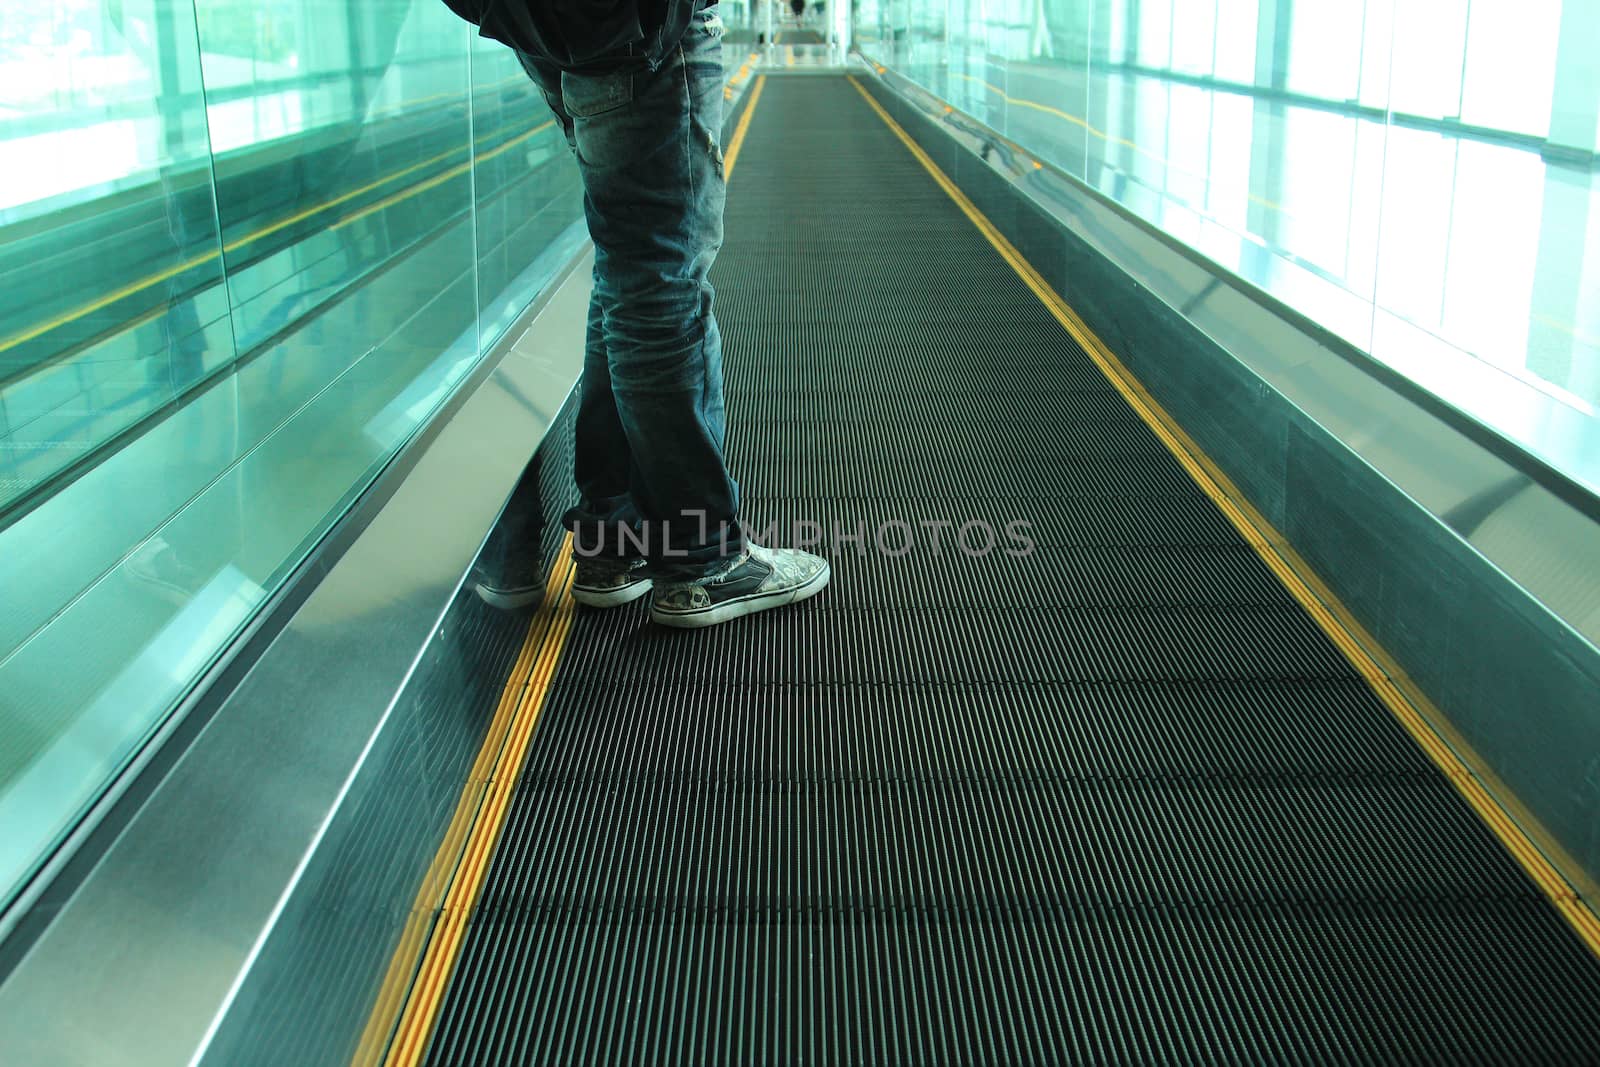 Movement of escalator with people by foto76